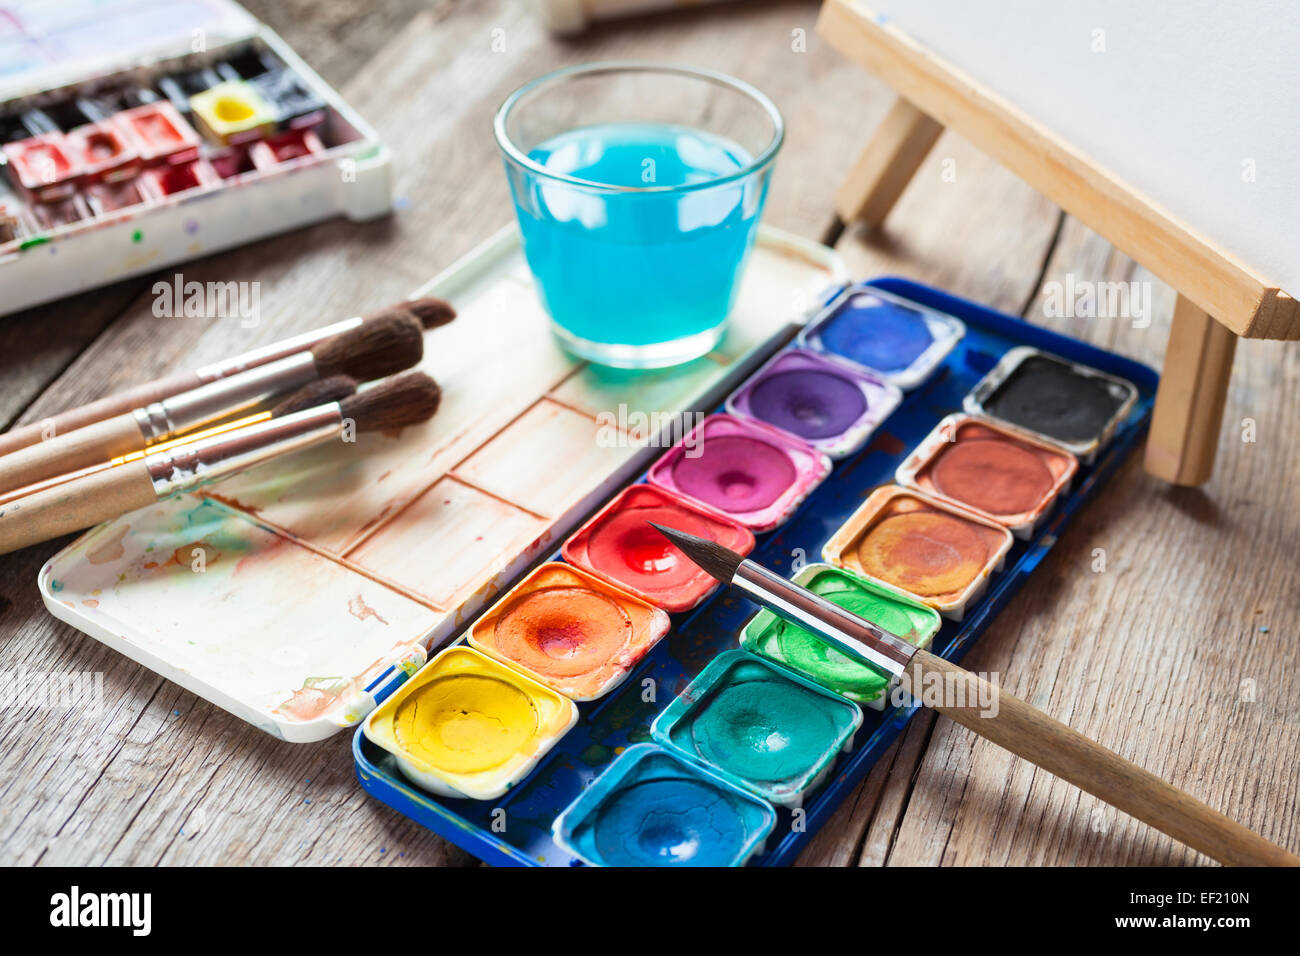 Set of watercolor paints, art brushes, glass of water and easel with painting on old wooden table. Stock Photo